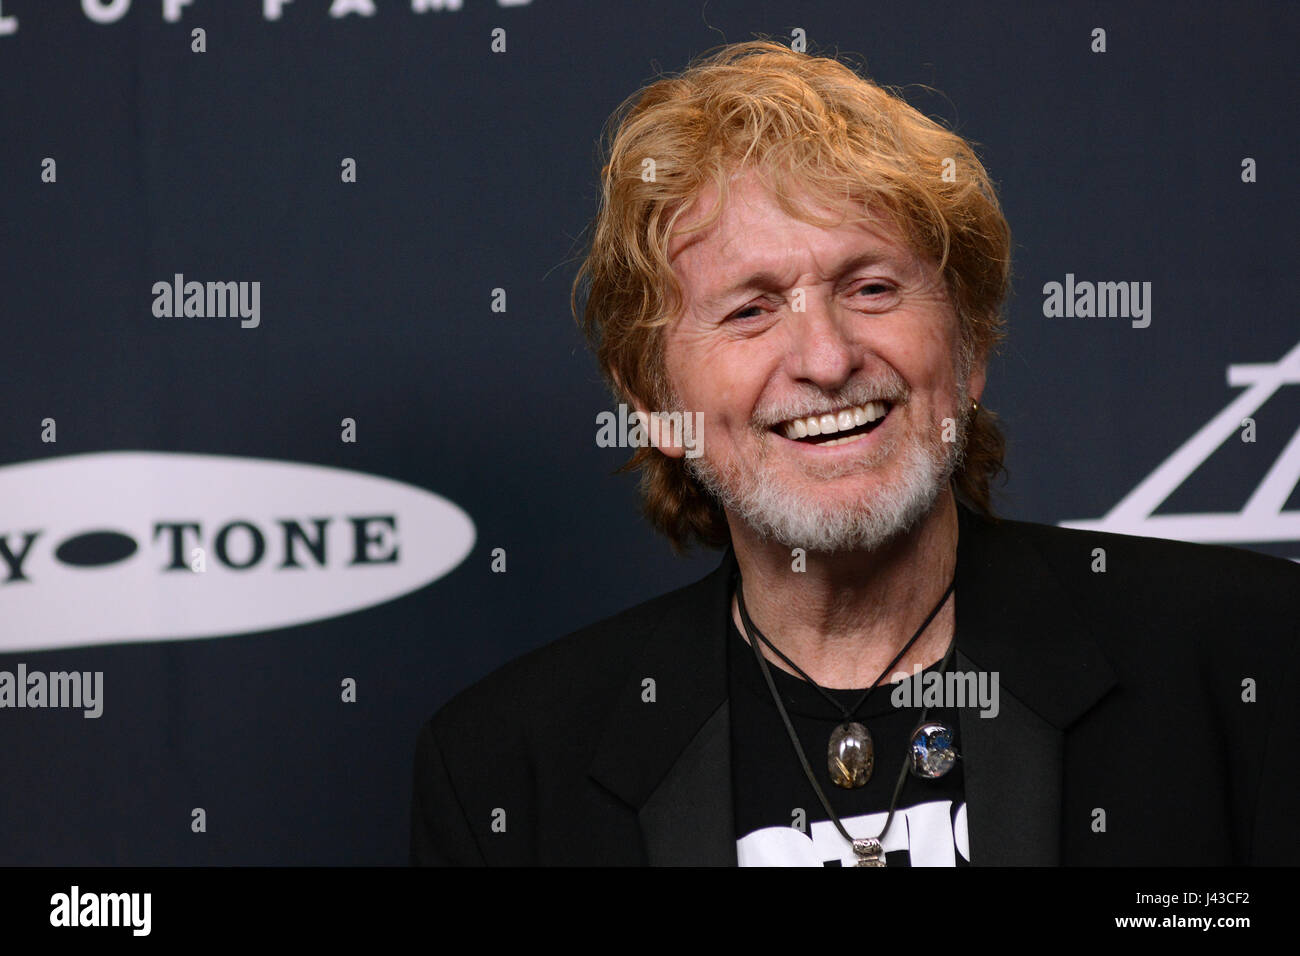 32nd Annual Rock & Roll Hall Of Fame Induction Ceremony at Barclays Center  - Press Room  Featuring: Jon Anderson Where: New York, New York, United States When: 07 Apr 2017 Credit: Ivan Nikolov/WENN.com Stock Photo